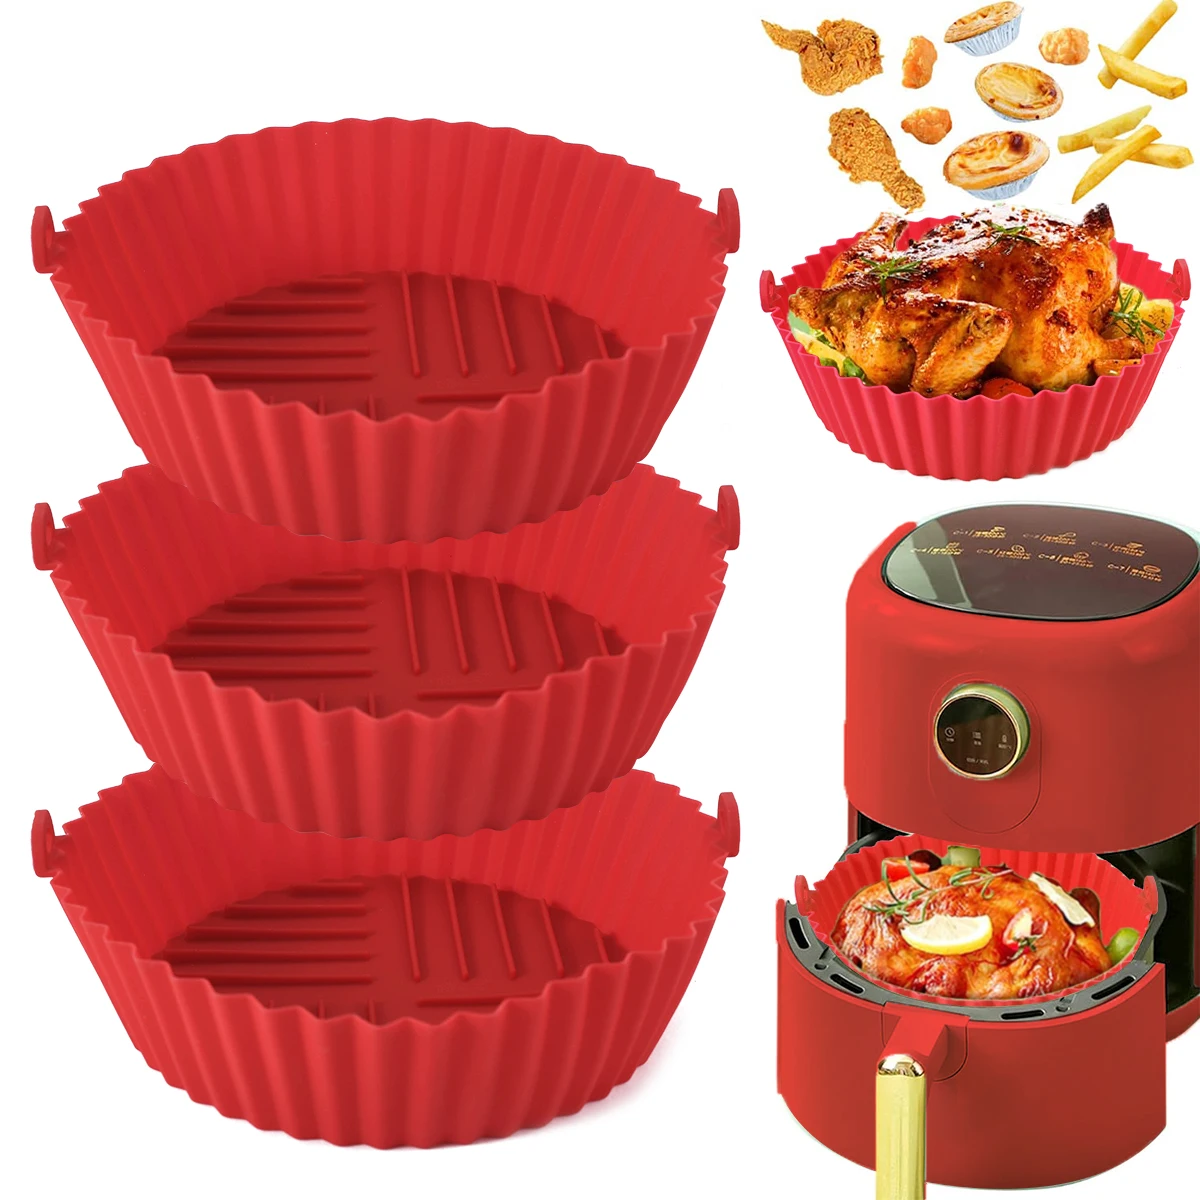 

Silicone Liners Air Fryer Silicone Pot Reusable Silicone Air Fryer Liners Food Safe Non Stick Air Fryer Basket